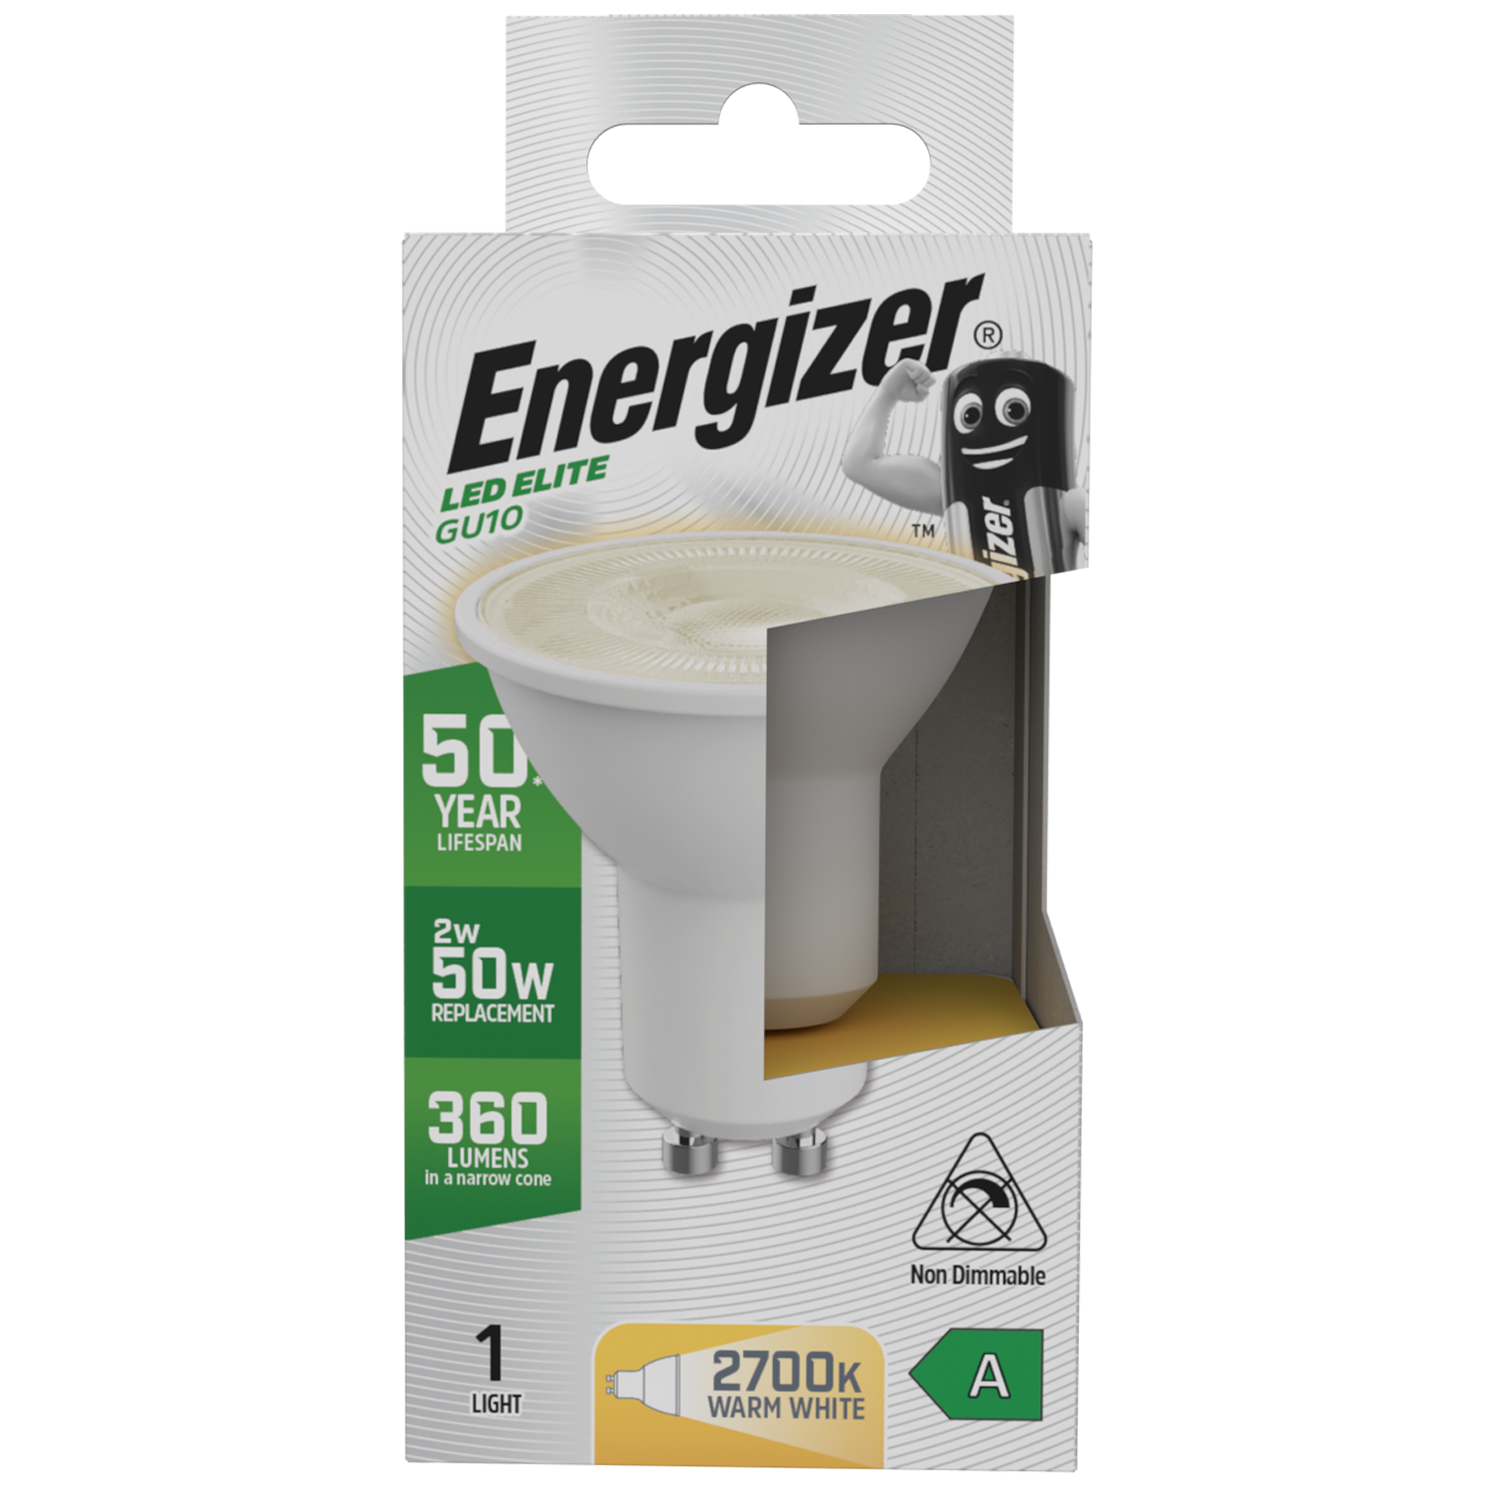 S29642 Energizer A Rated LED Elite GU10 360lm 2W 2700K (Warm White) - Box of 1